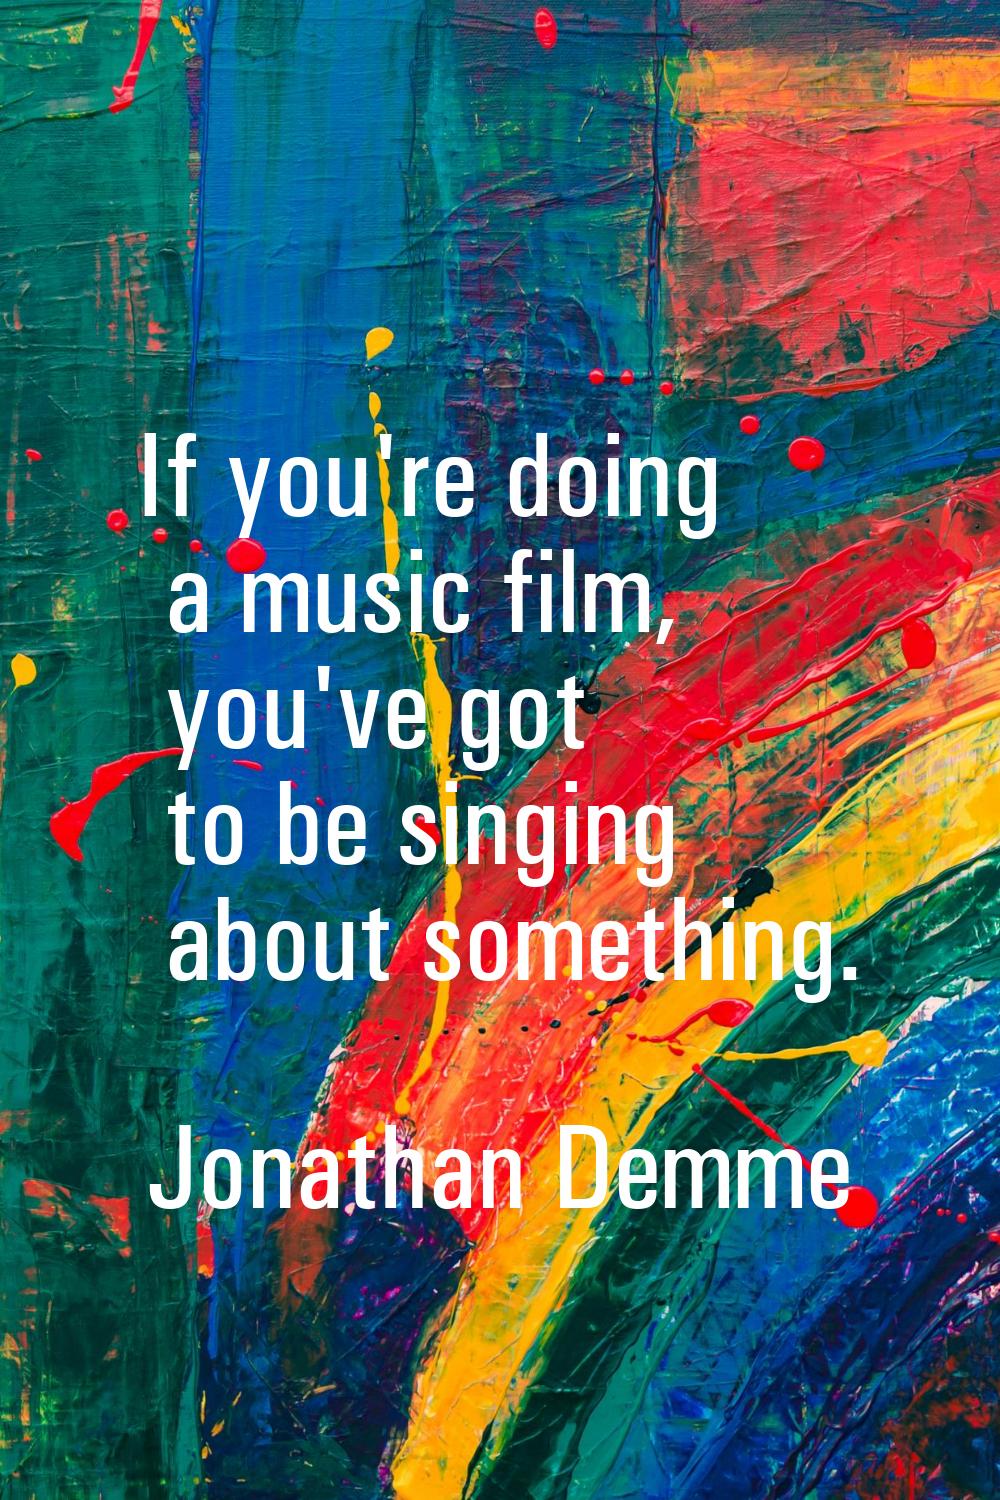 If you're doing a music film, you've got to be singing about something.